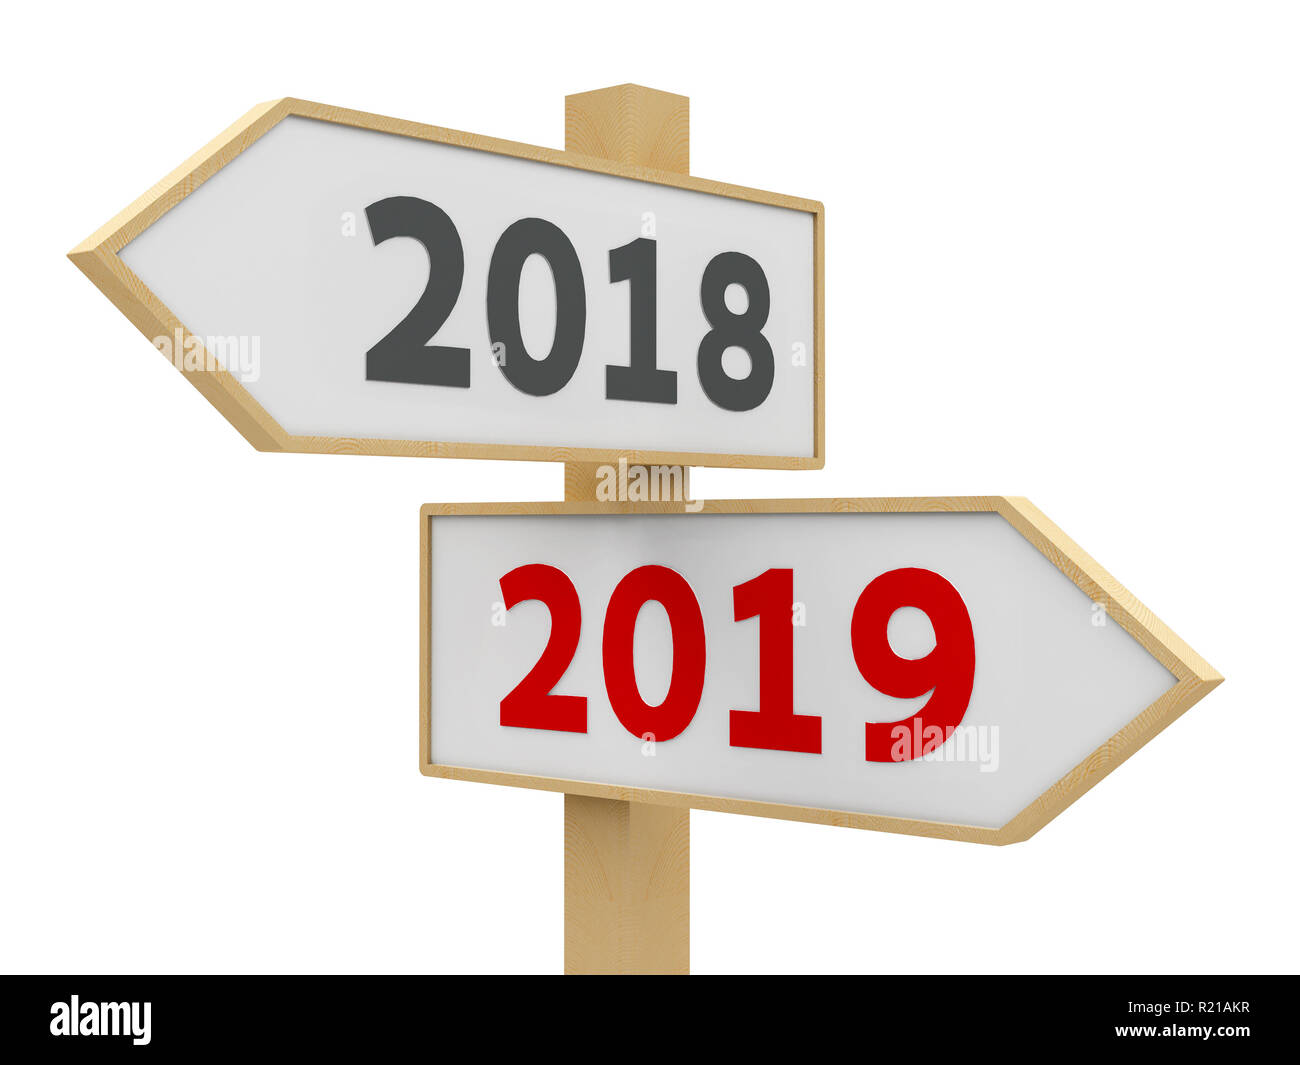 Road sign with 2018-2019 change on white background represents the new 2019 year, three-dimensional rendering, 3D illustration Stock Photo